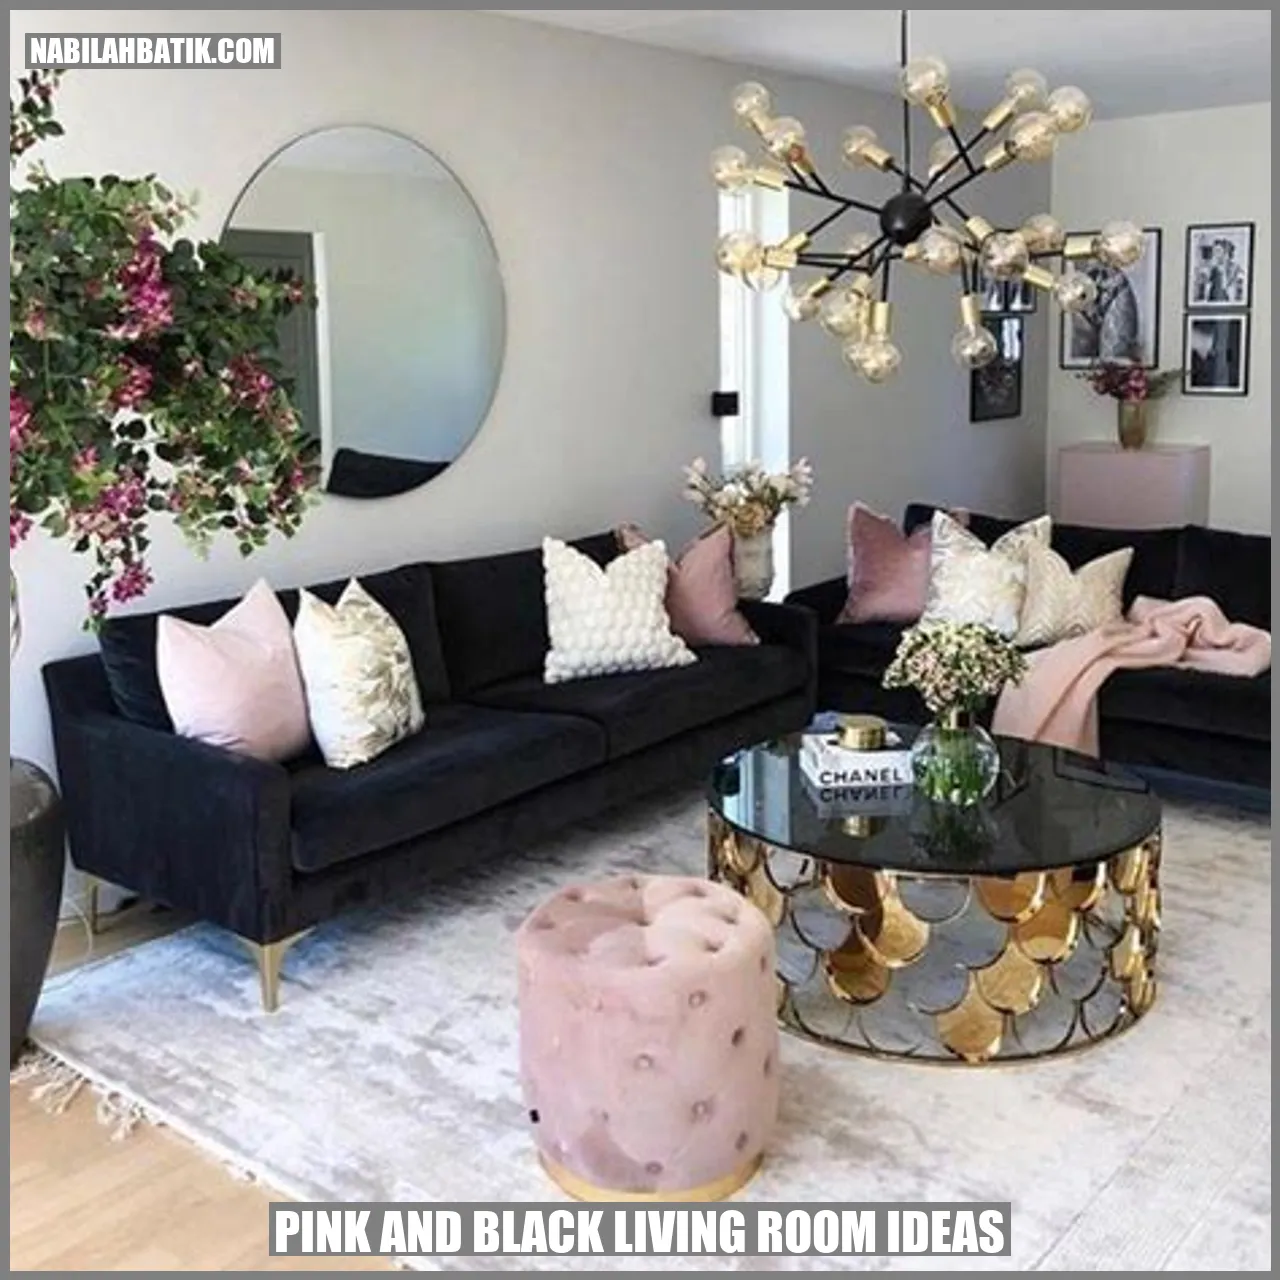 Pink and Black Living Room Ideas